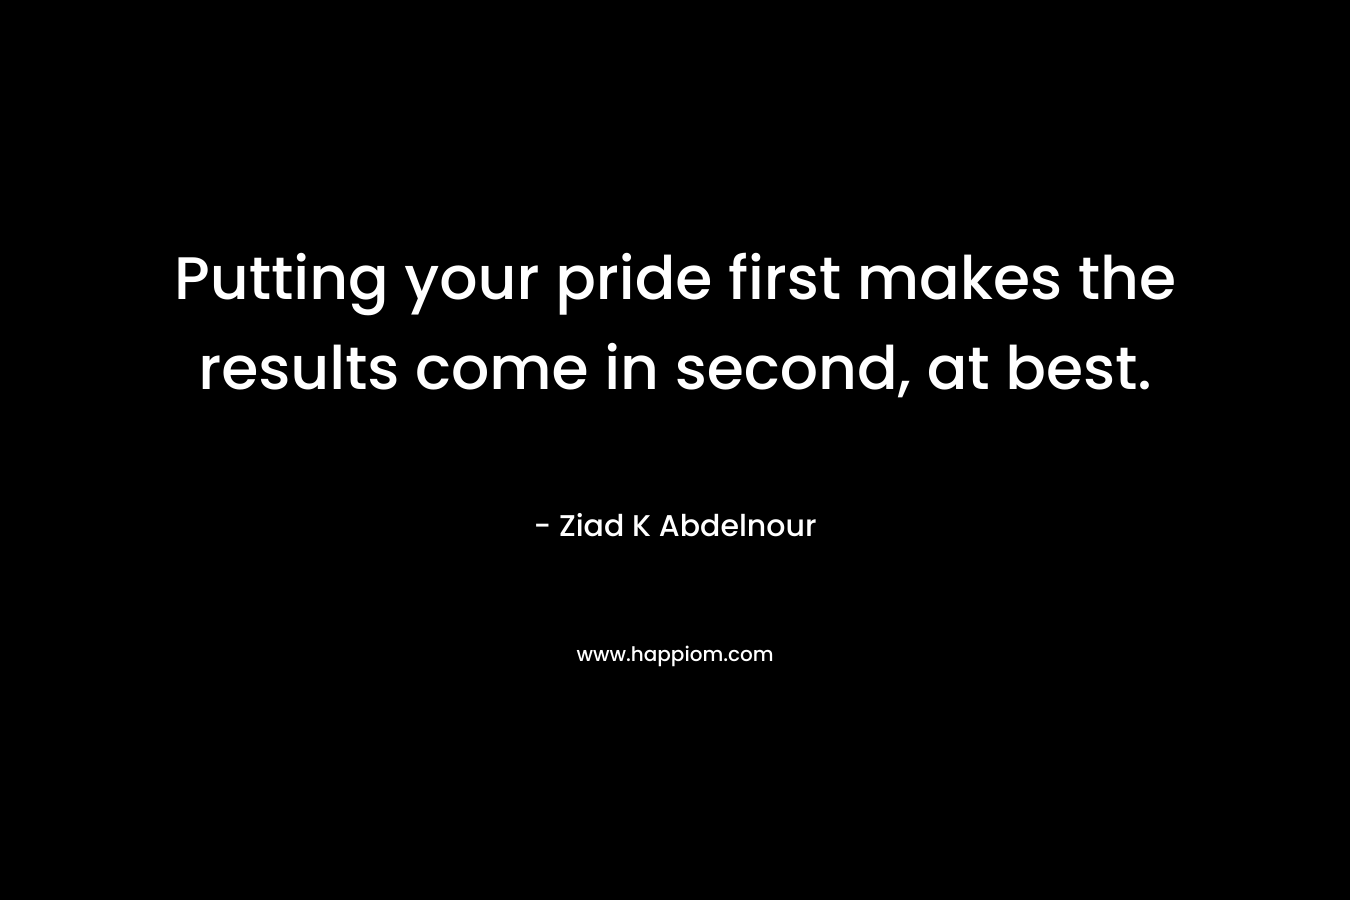 Putting your pride first makes the results come in second, at best.